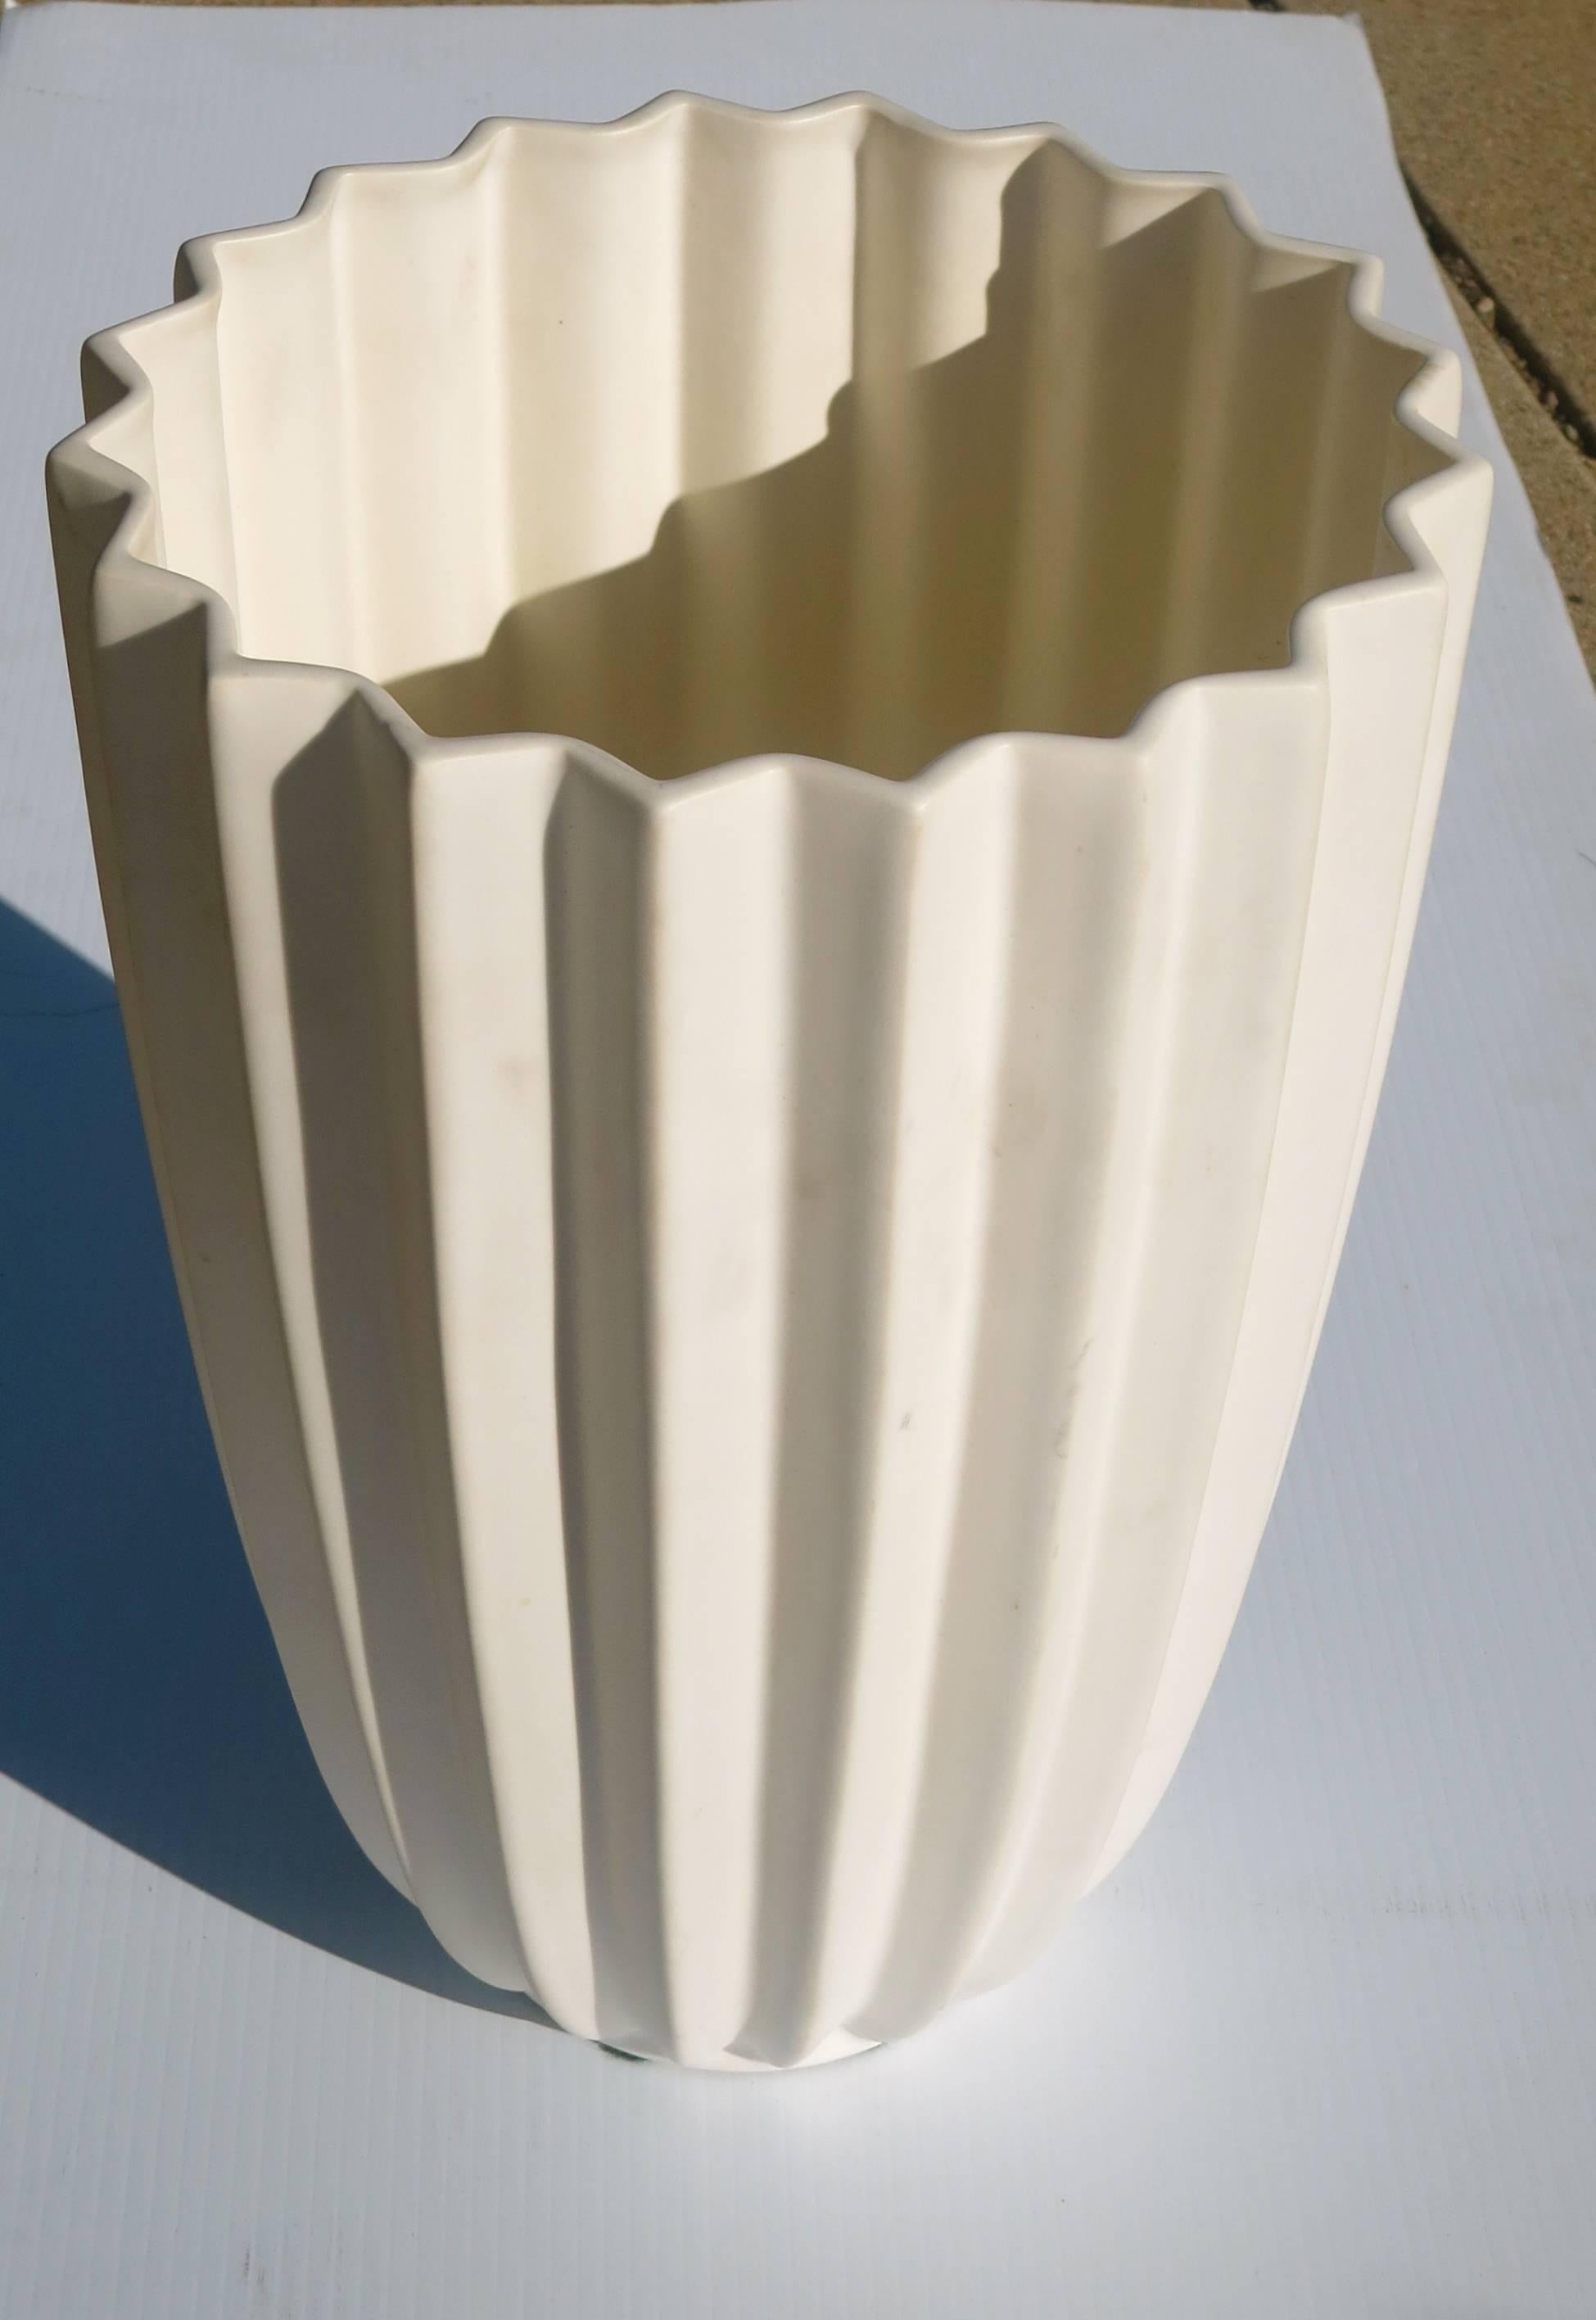 Elegant tall mate white ceramic vase, circa 1990s made in France by Fainciere de Charolles for Roche Bobois, excellent condition no chips or cracks, great as a center piece.